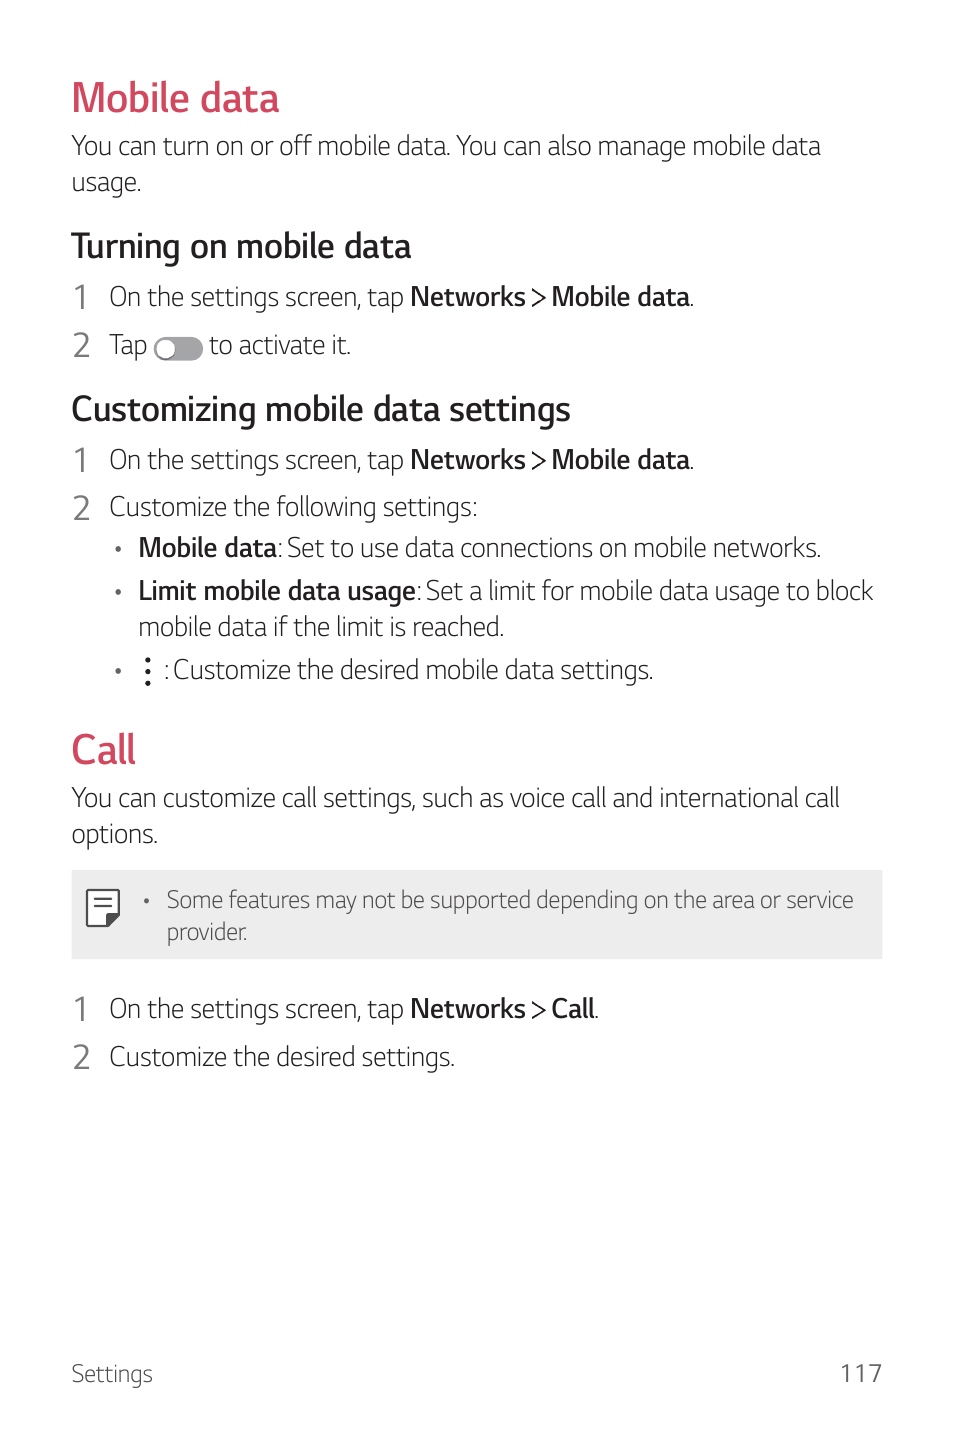 Mobile data, Call, Turning on mobile data | Customizing mobile data settings | LG G6 H872 User Manual | Page 118 / 183